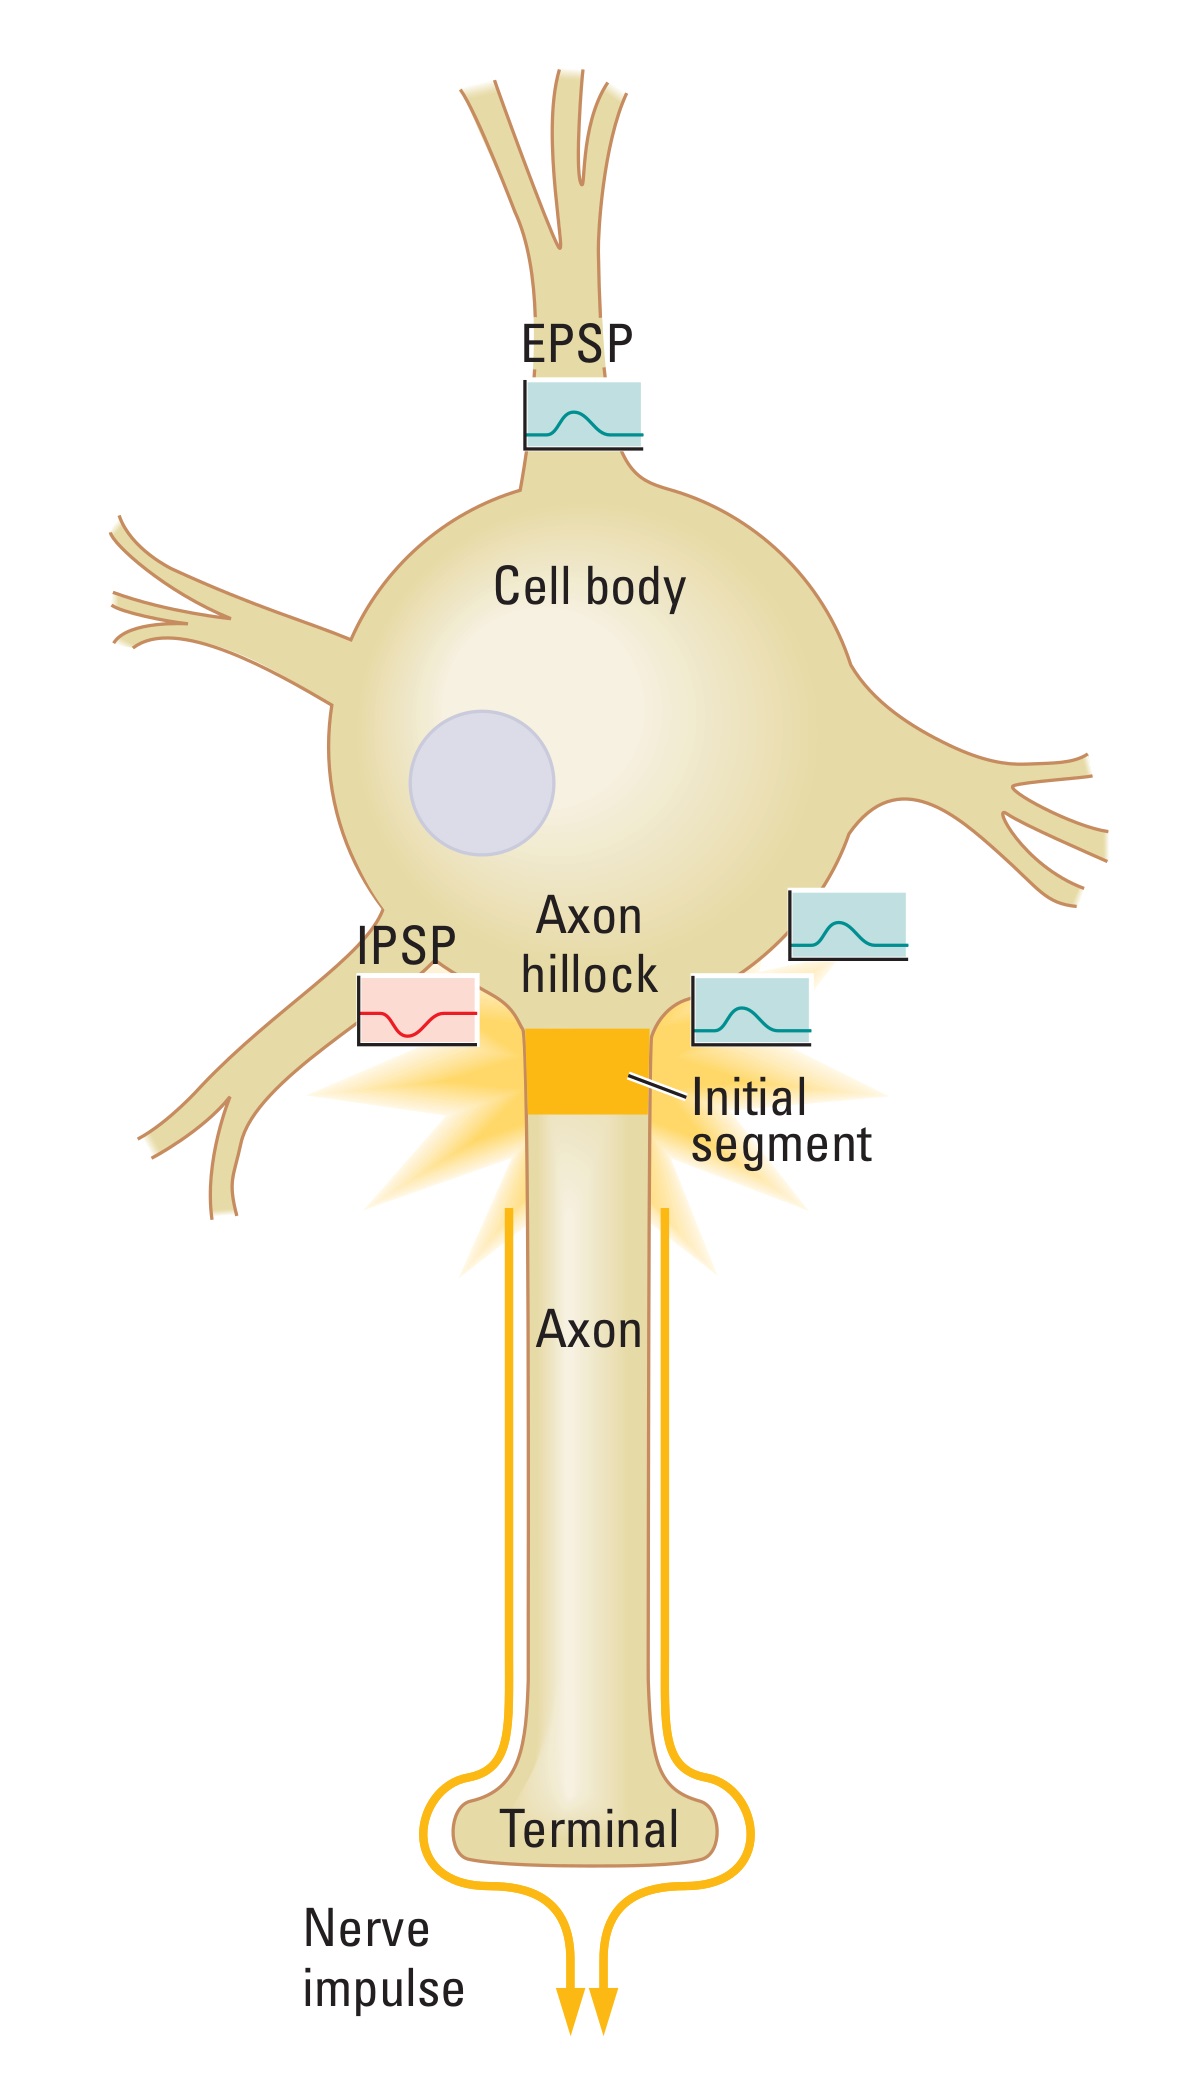 A neuron with 3 excitatory and 1 inhibitory inputs on its dendrites and soma. The first excitatory input is located near the dendrite on the opposite side from the axon. The second excitatory input is near the axon hillock. The third excitatory input is near the axon hillock too, closelyto the second one. An inhibitory input is near the axon hillock, from the other side of the axon stem then two excitatory inputs.